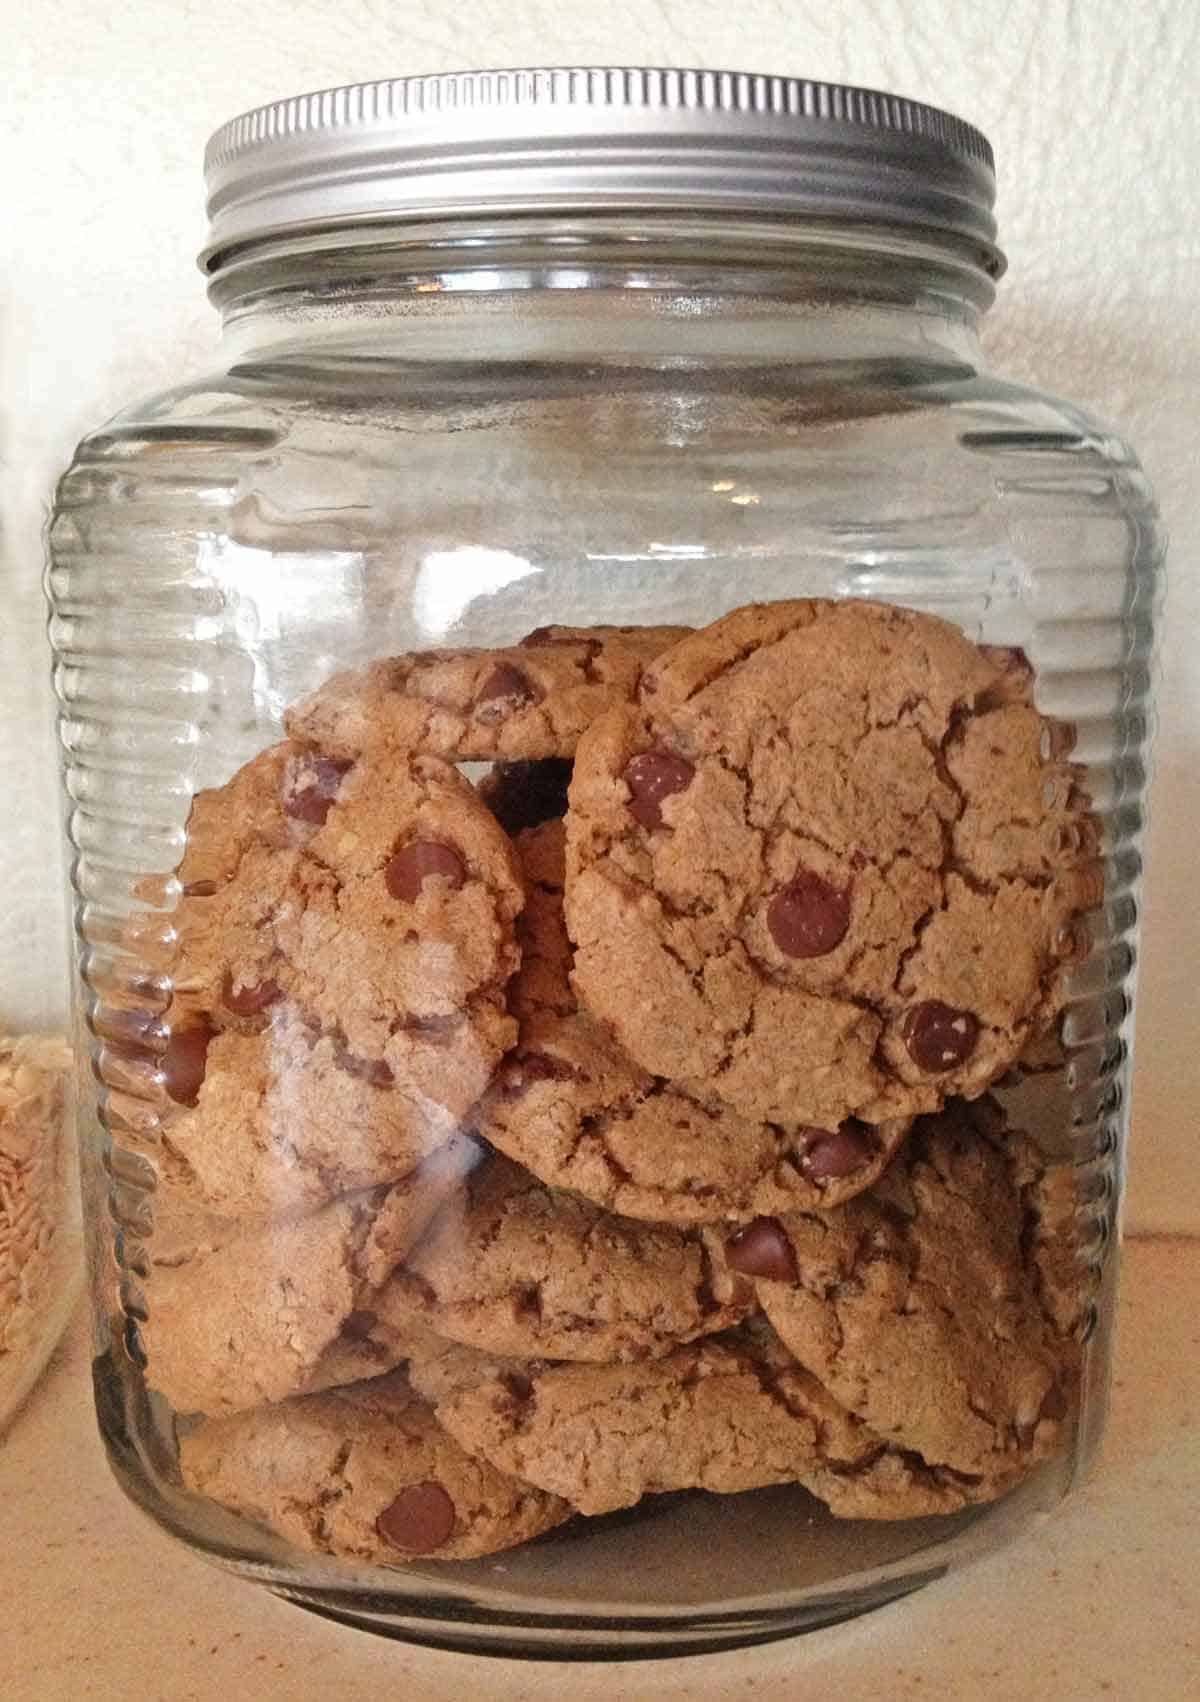 A glass cookie jar filled with sweet and salty chocolate chip cookies.